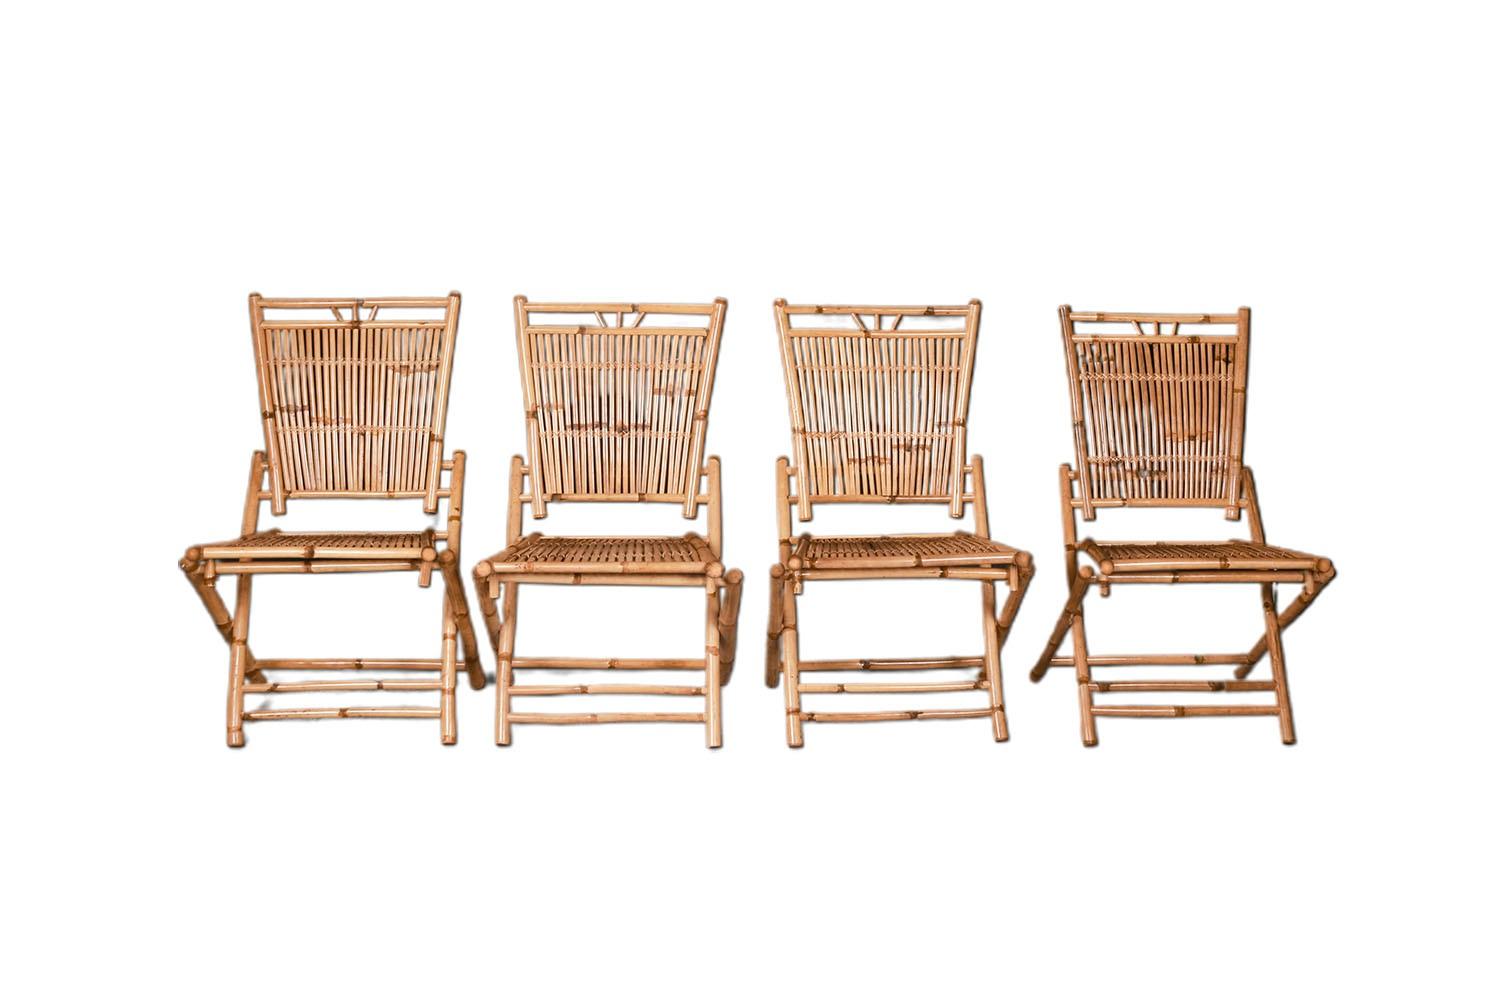 A set of four beautiful vintage mid century bamboo and rattan folding side chairs for indoor or outdoor use. Features X-form legs with stretchers/ foot rests and have comfortable slatted seats and backrests. The chairs are lightweight and fold flat